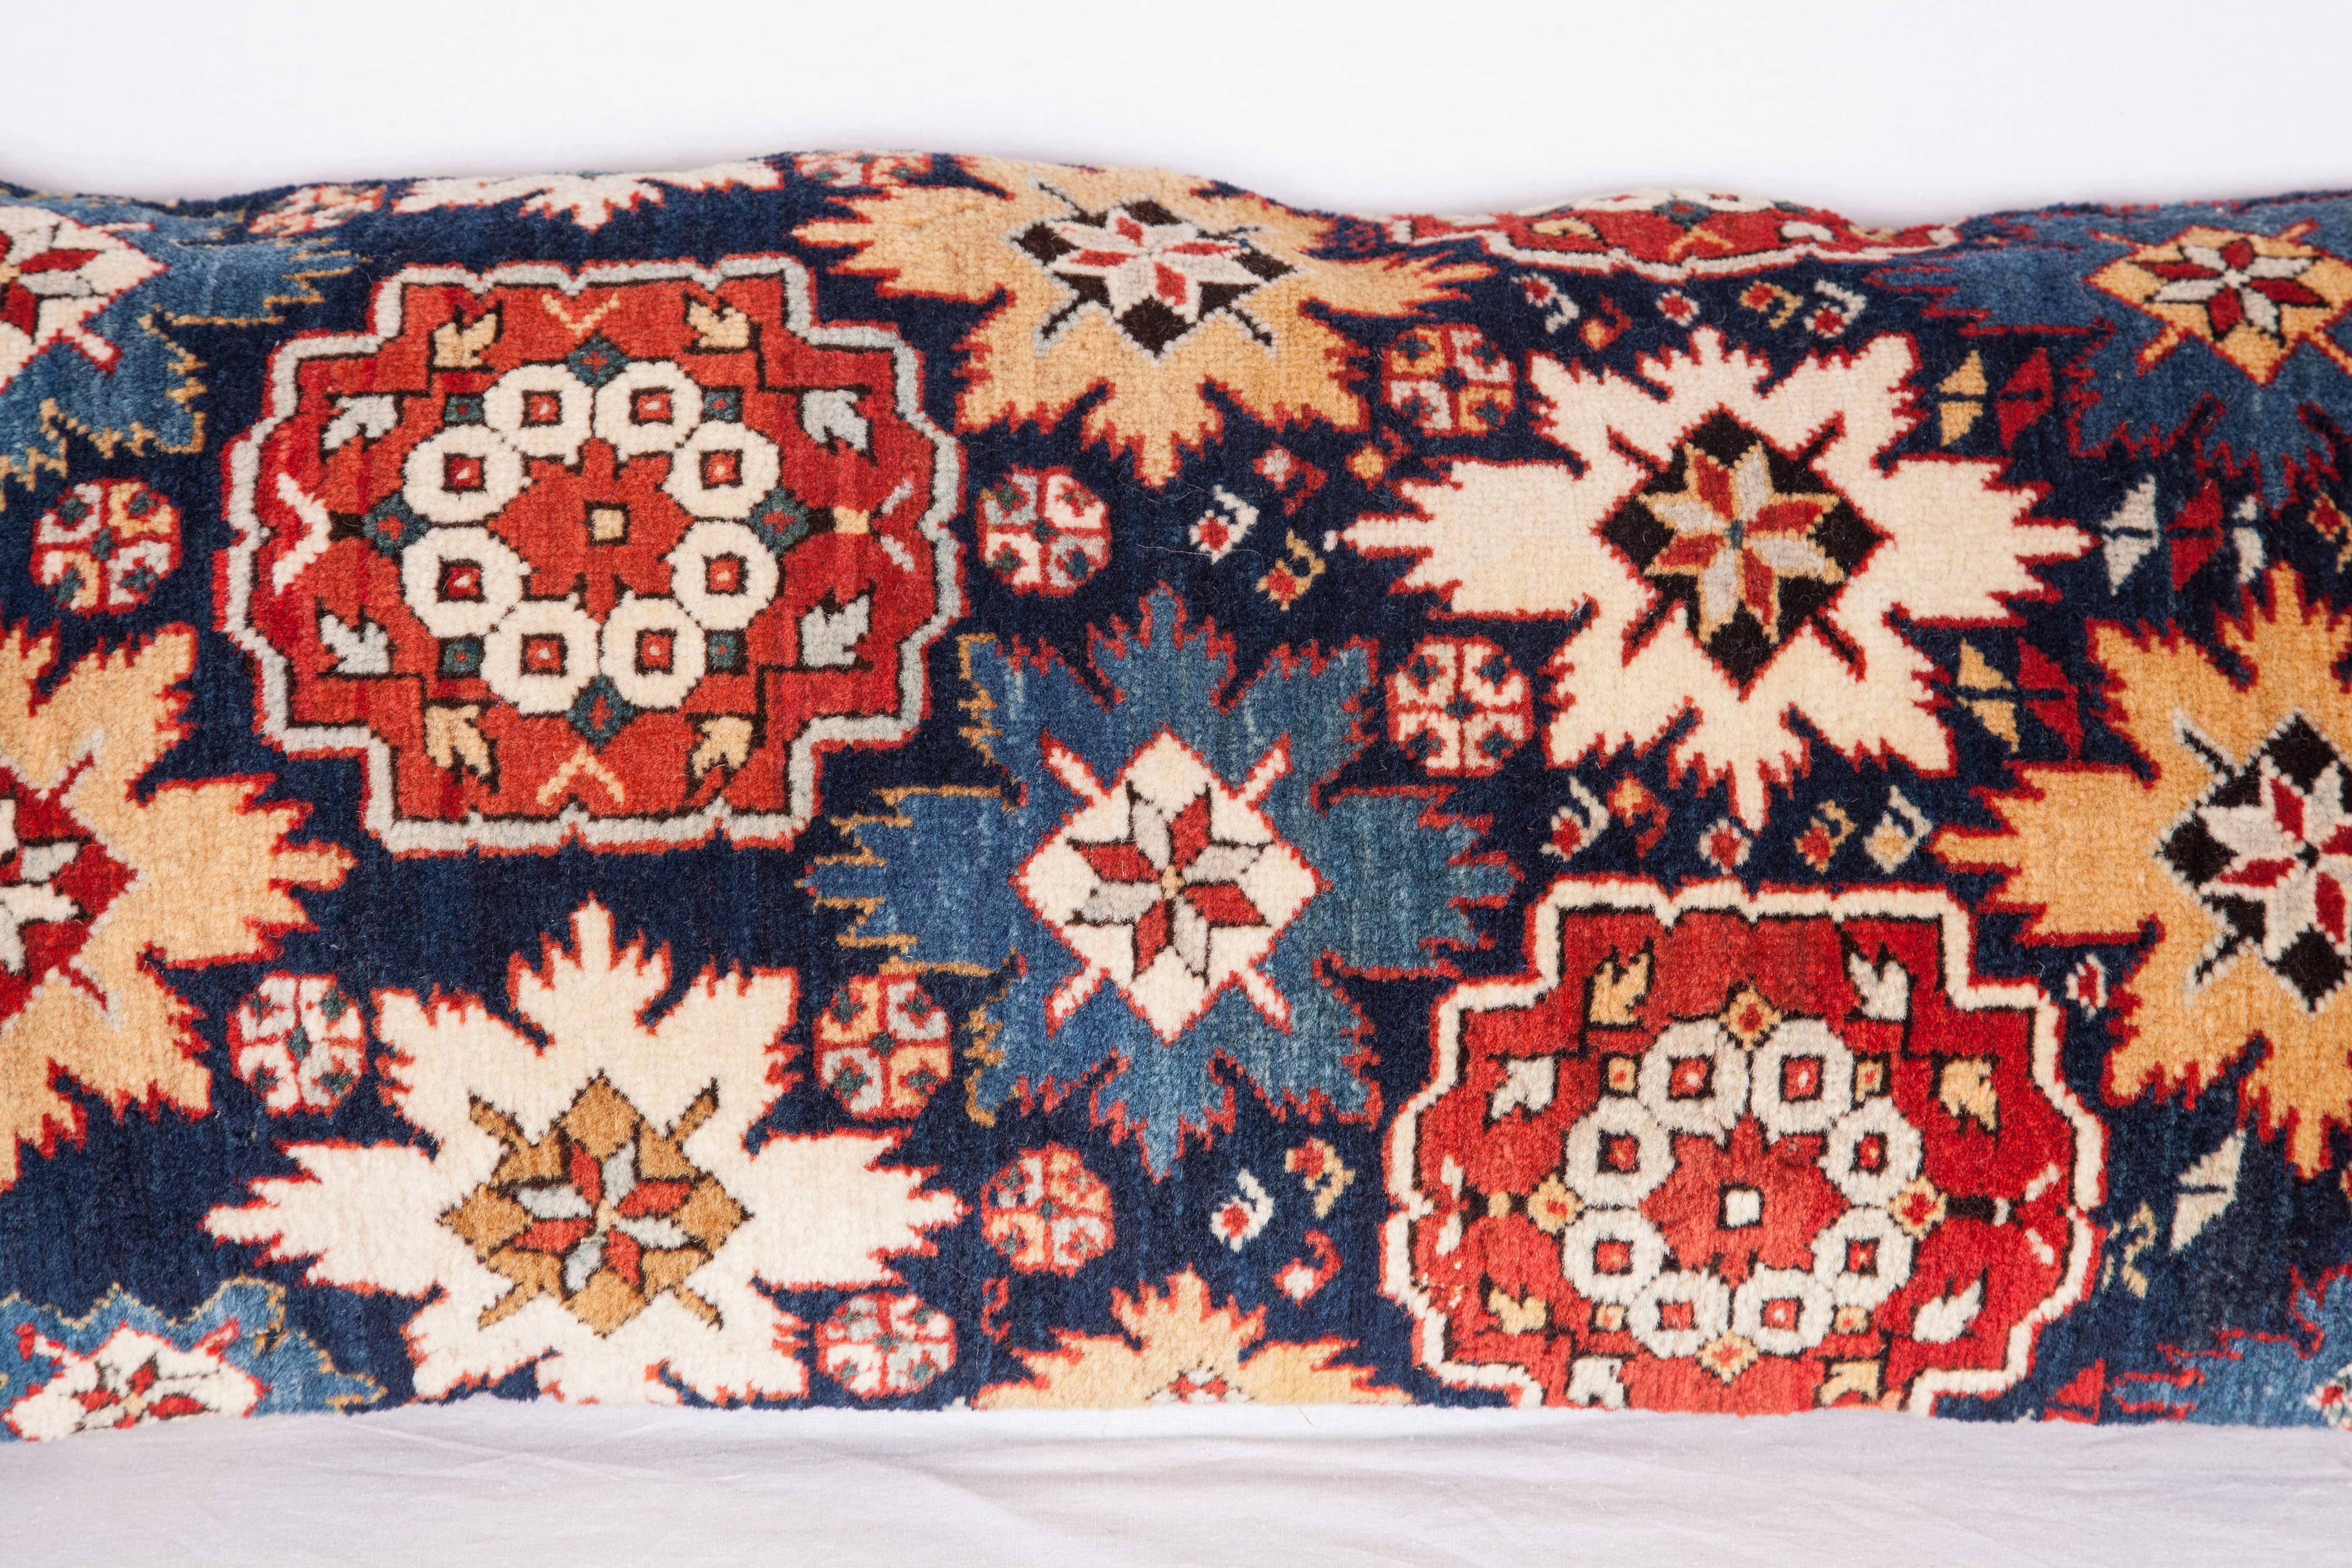 Pillow is made out of a 19th century fragment of a Caucasian Shriven rug. The pillow does not come with an insert but with a cotton bag made to the size to accommodate the insert material. The backing is made of linen. Please note filling is not